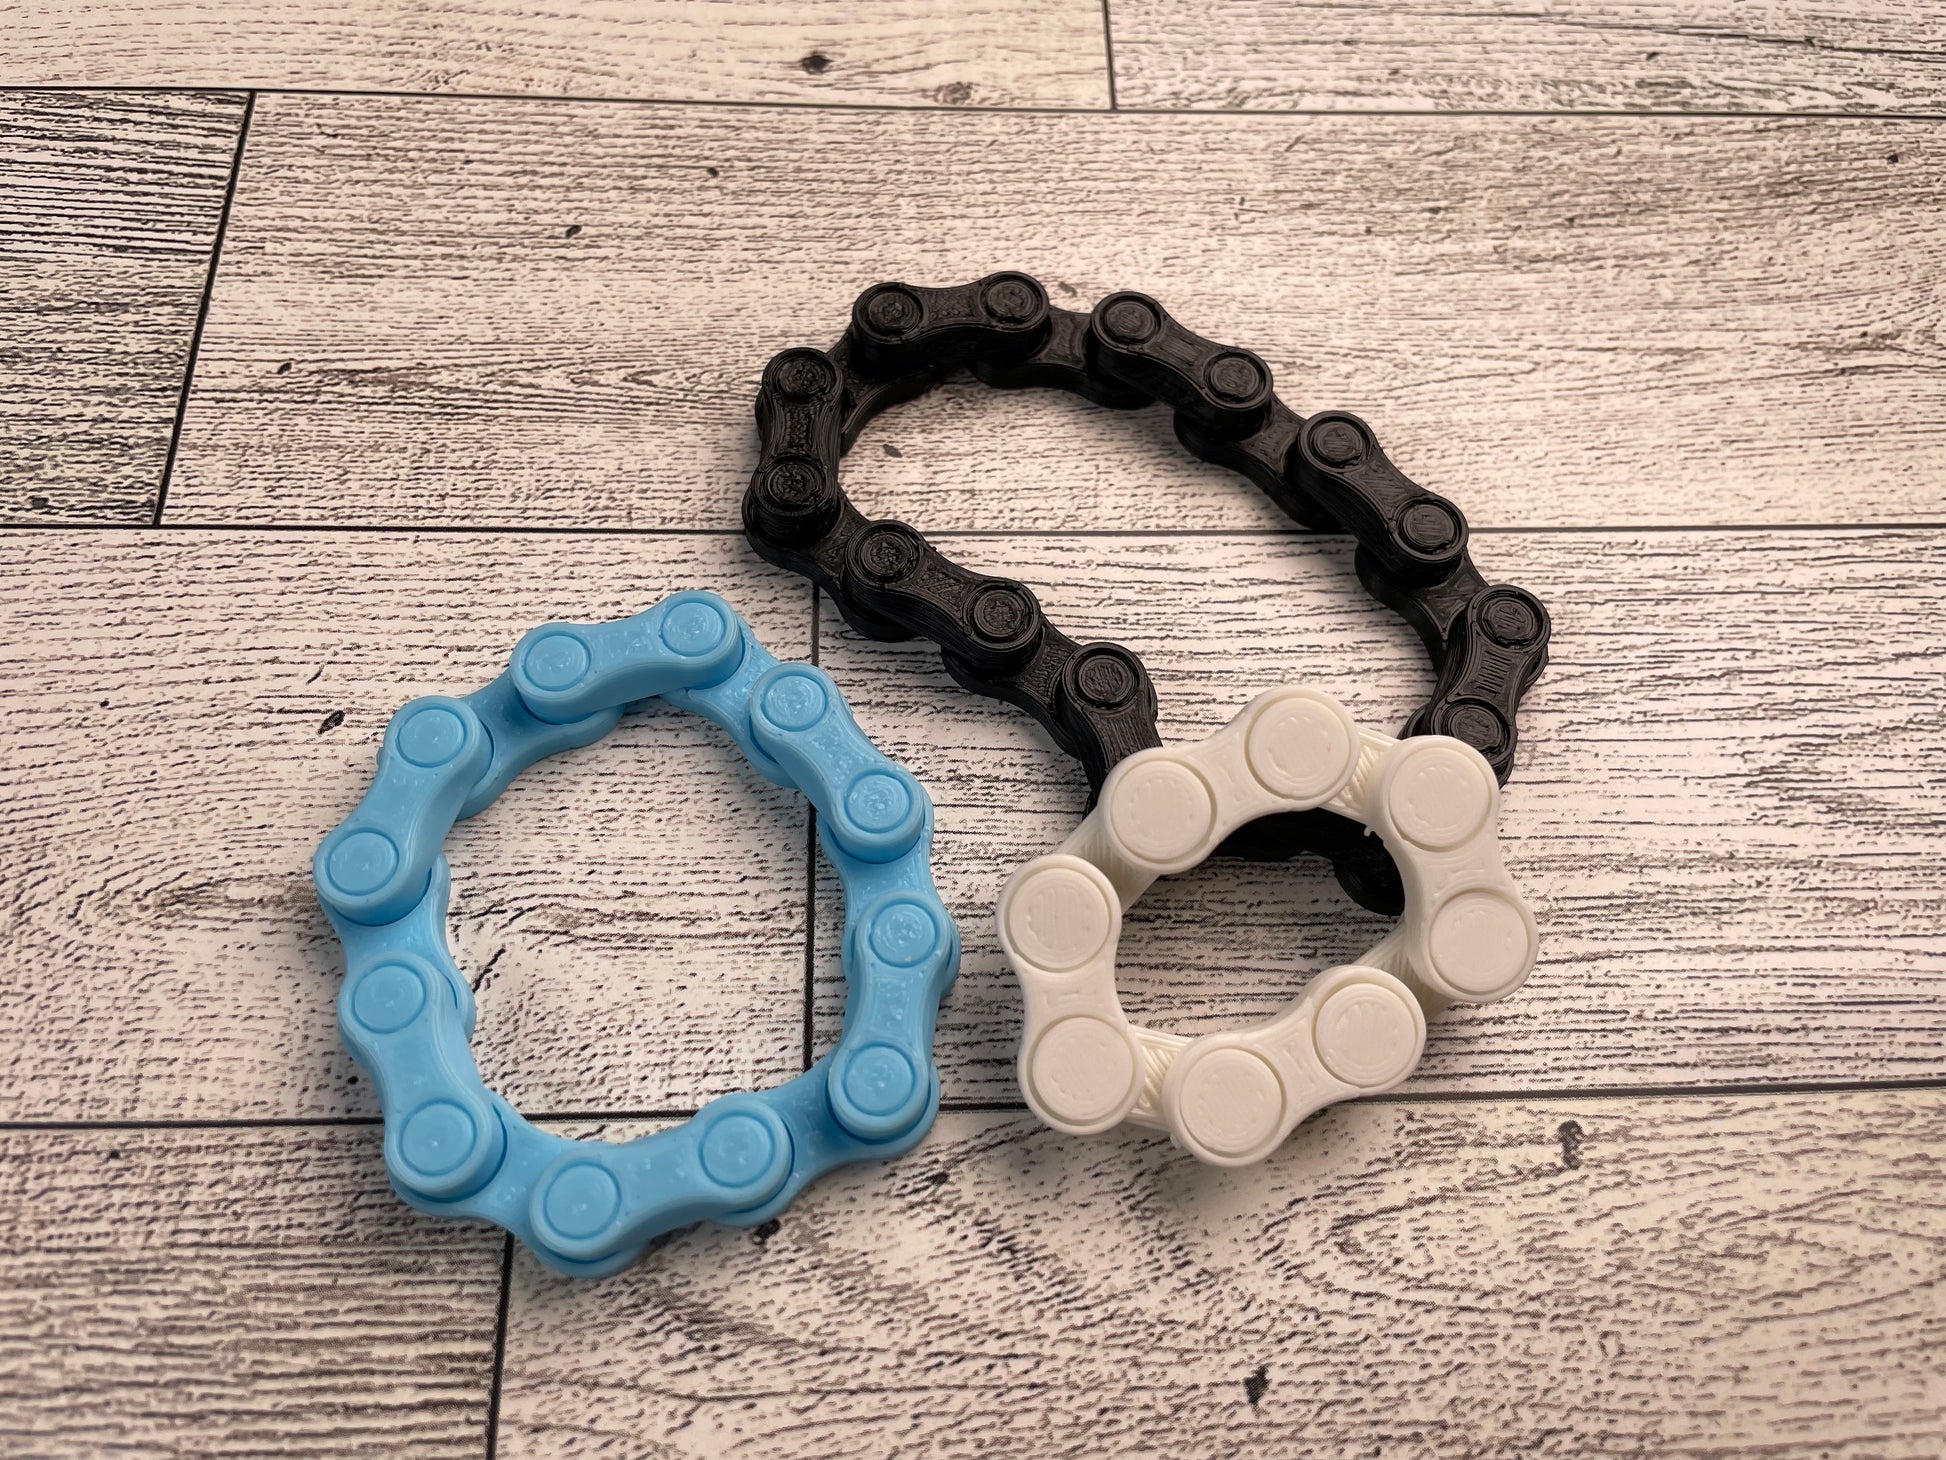 Three chain links in three sizes and colors on a wood backdrop. The bigest chain is black, is arranged in kidney bean shape, and has eight links. Below and to the left of the black chain is a blue chain arranged in a circle and has six links. The last chain is white and is leaning against the bottom of the black chain. This chain is white, has four links and is arranged in a squashed circle.